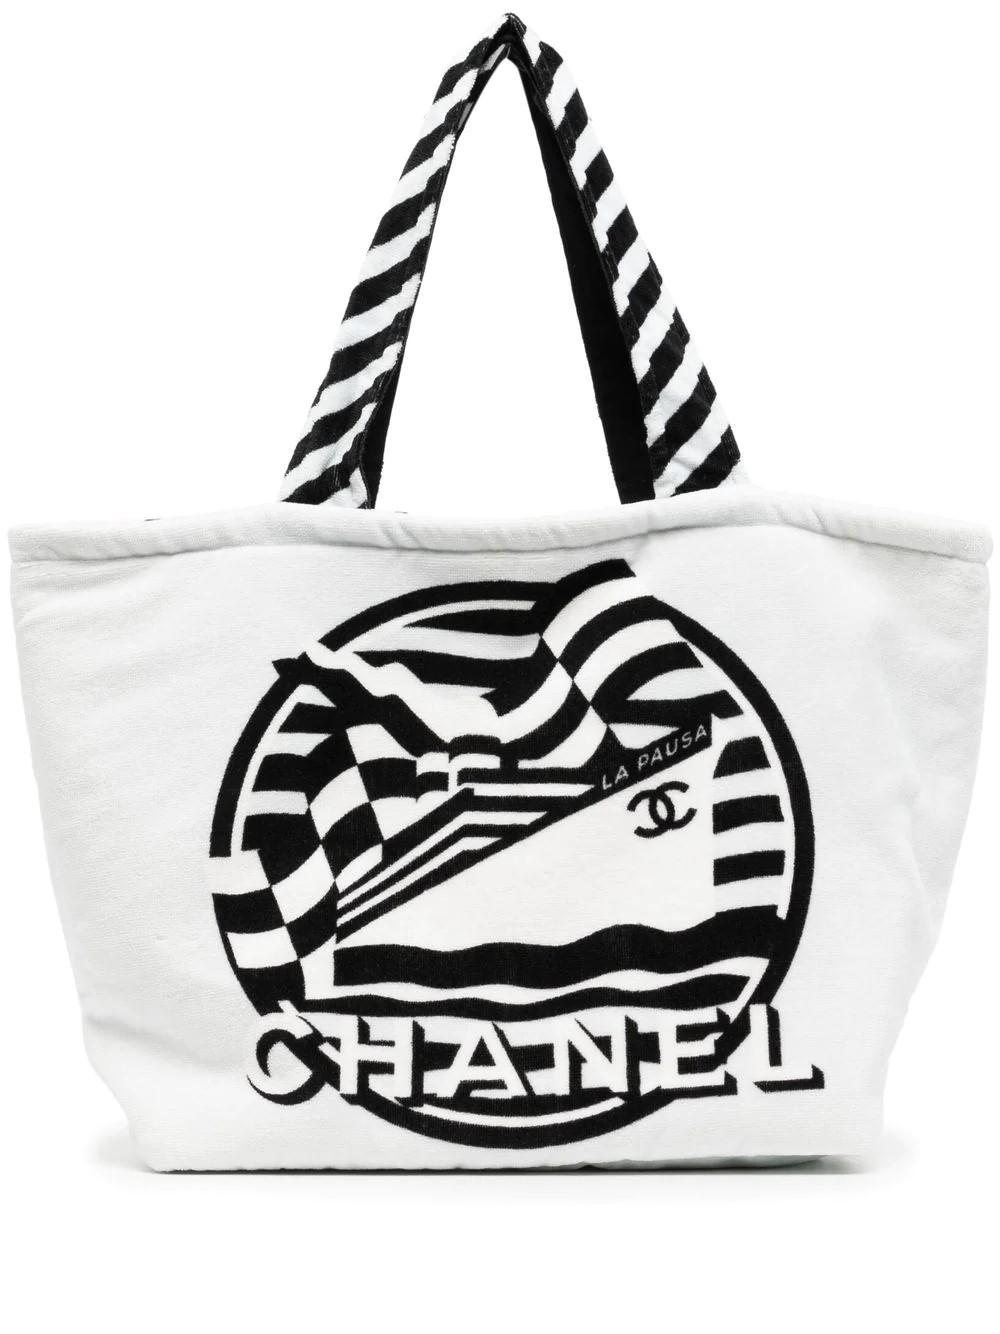 From the infamous 2019 Cruise collection set on the cruise ship La Pausa, this Chanel La Pausa Terry Tote is a perfect addition to your beach-ready wardrobe. Made 100% from cotton, this bag is lightweight, washable and easy to carry. Inside comes